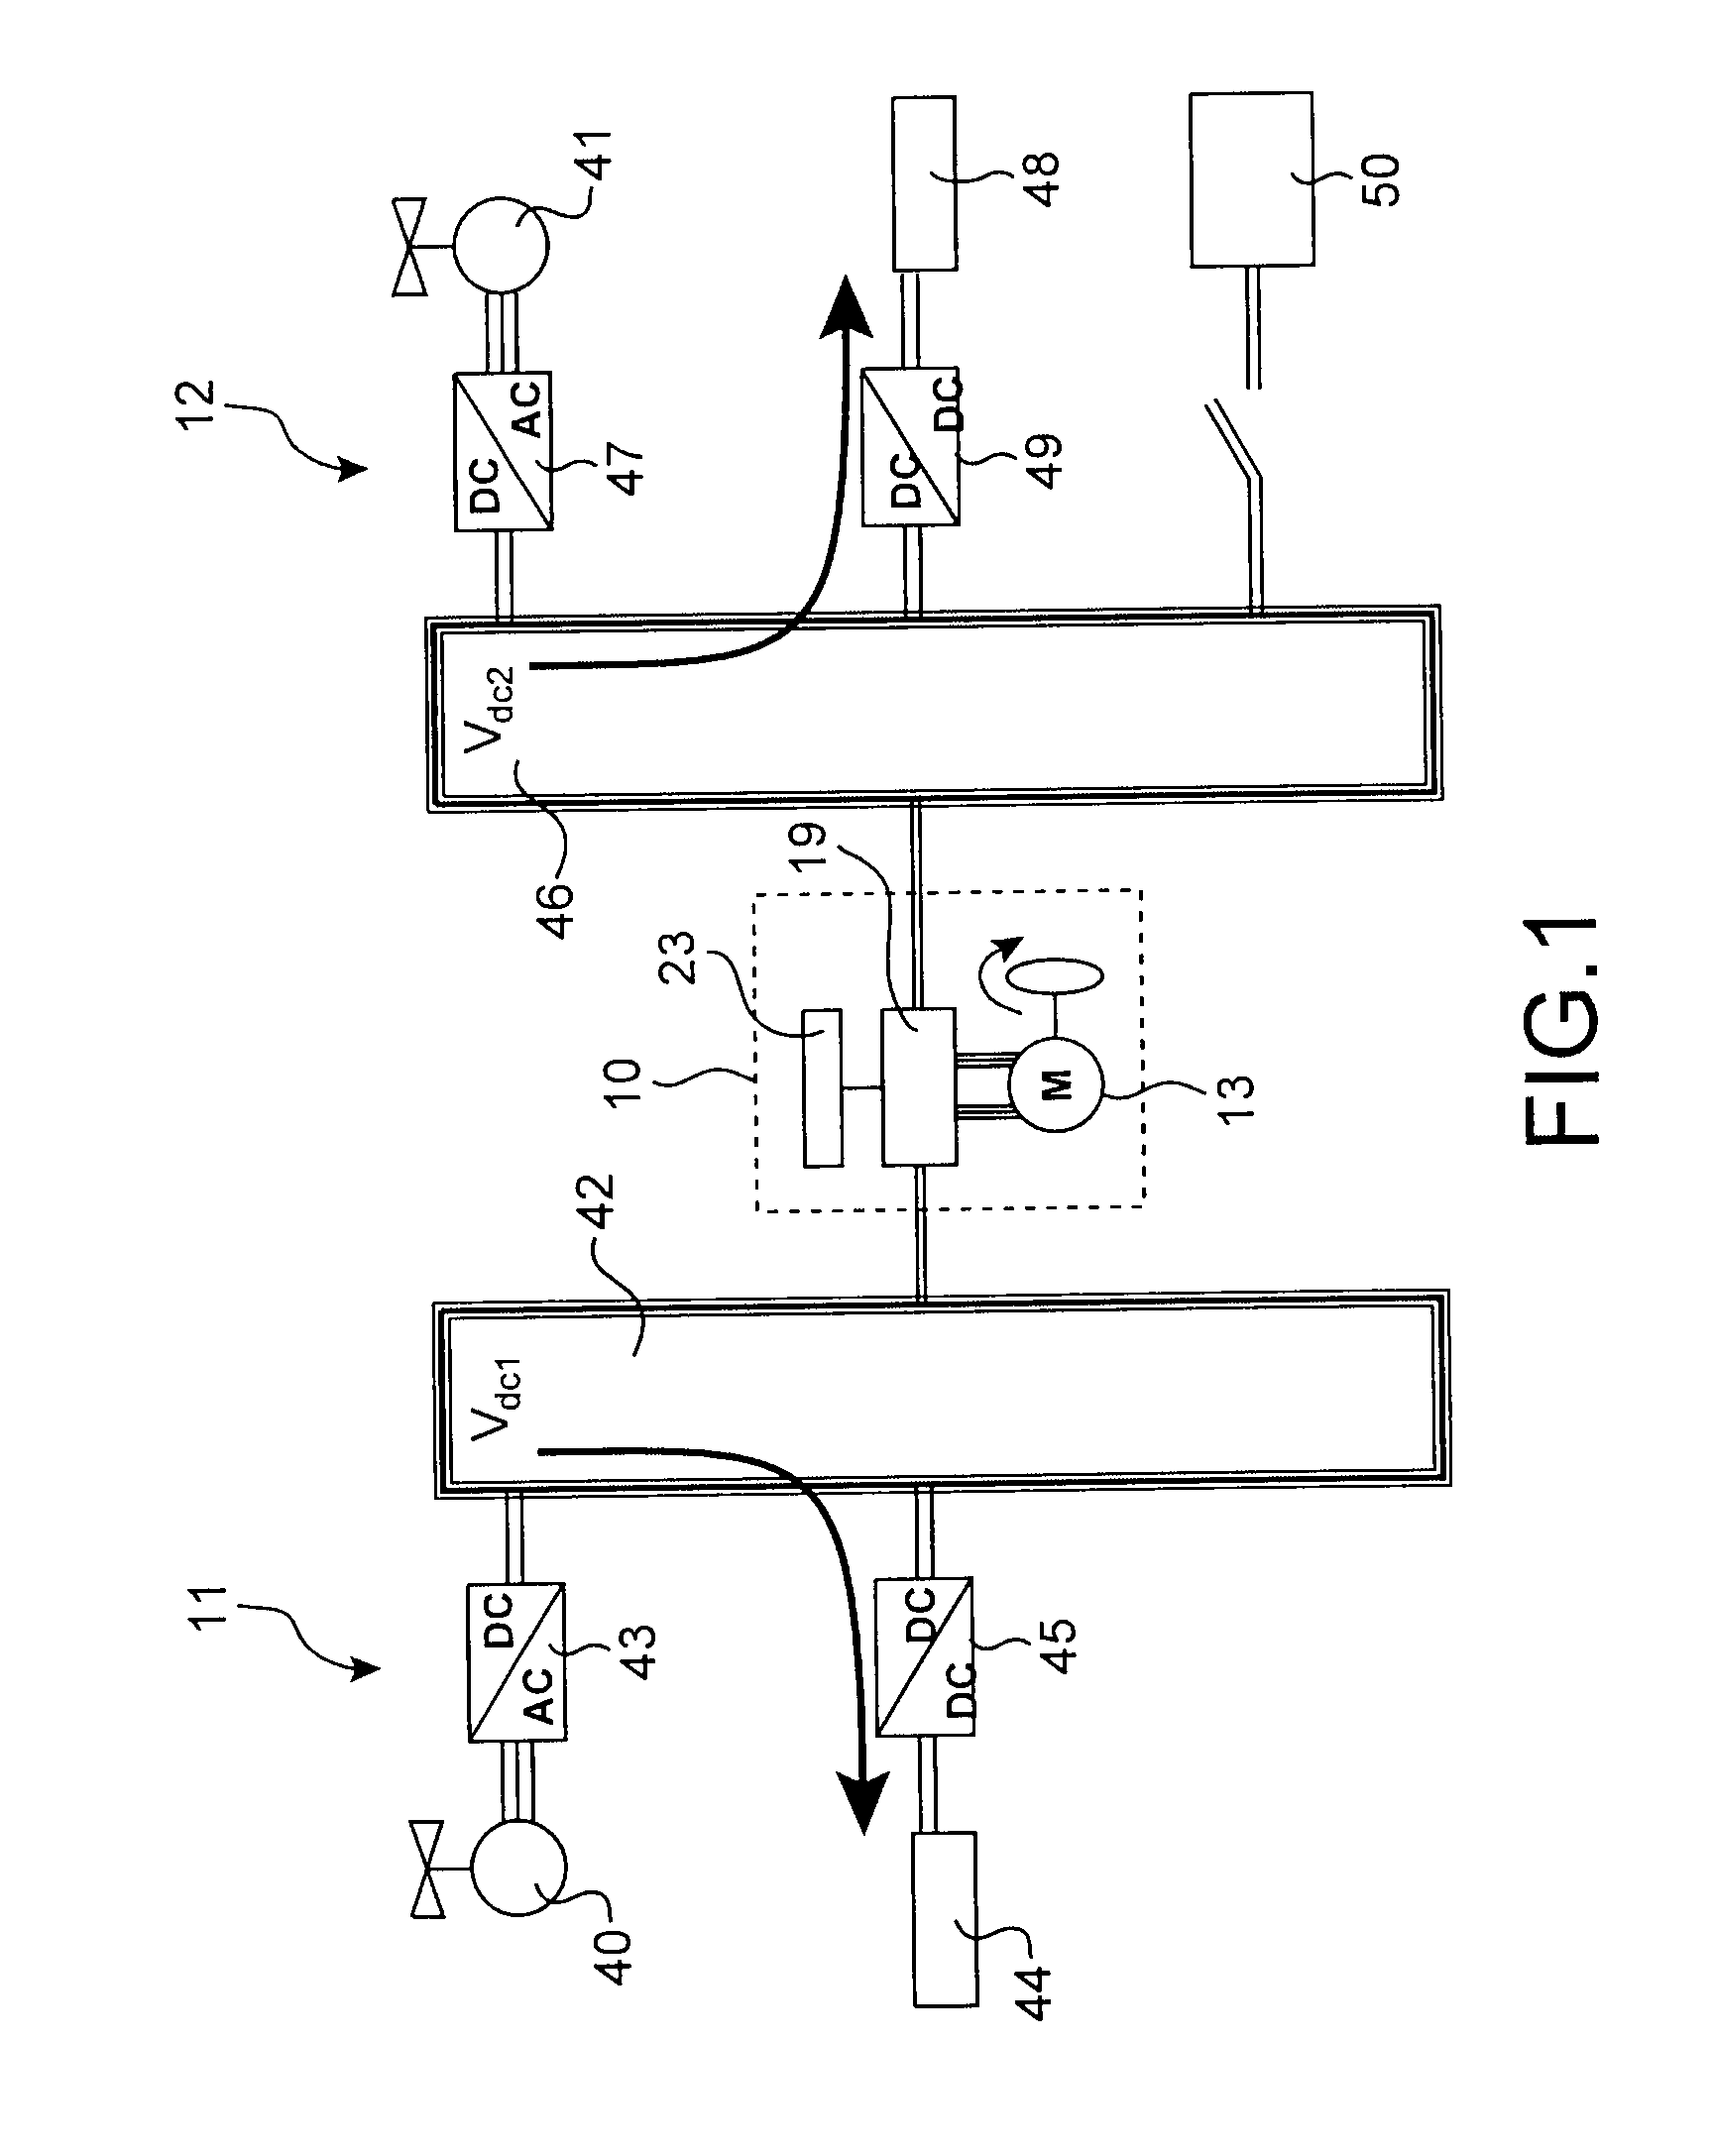 Mixed Device for Controlling Power Transfer Between Two Cores of a Direct Current Network and Supplying an Alternating Current Motor